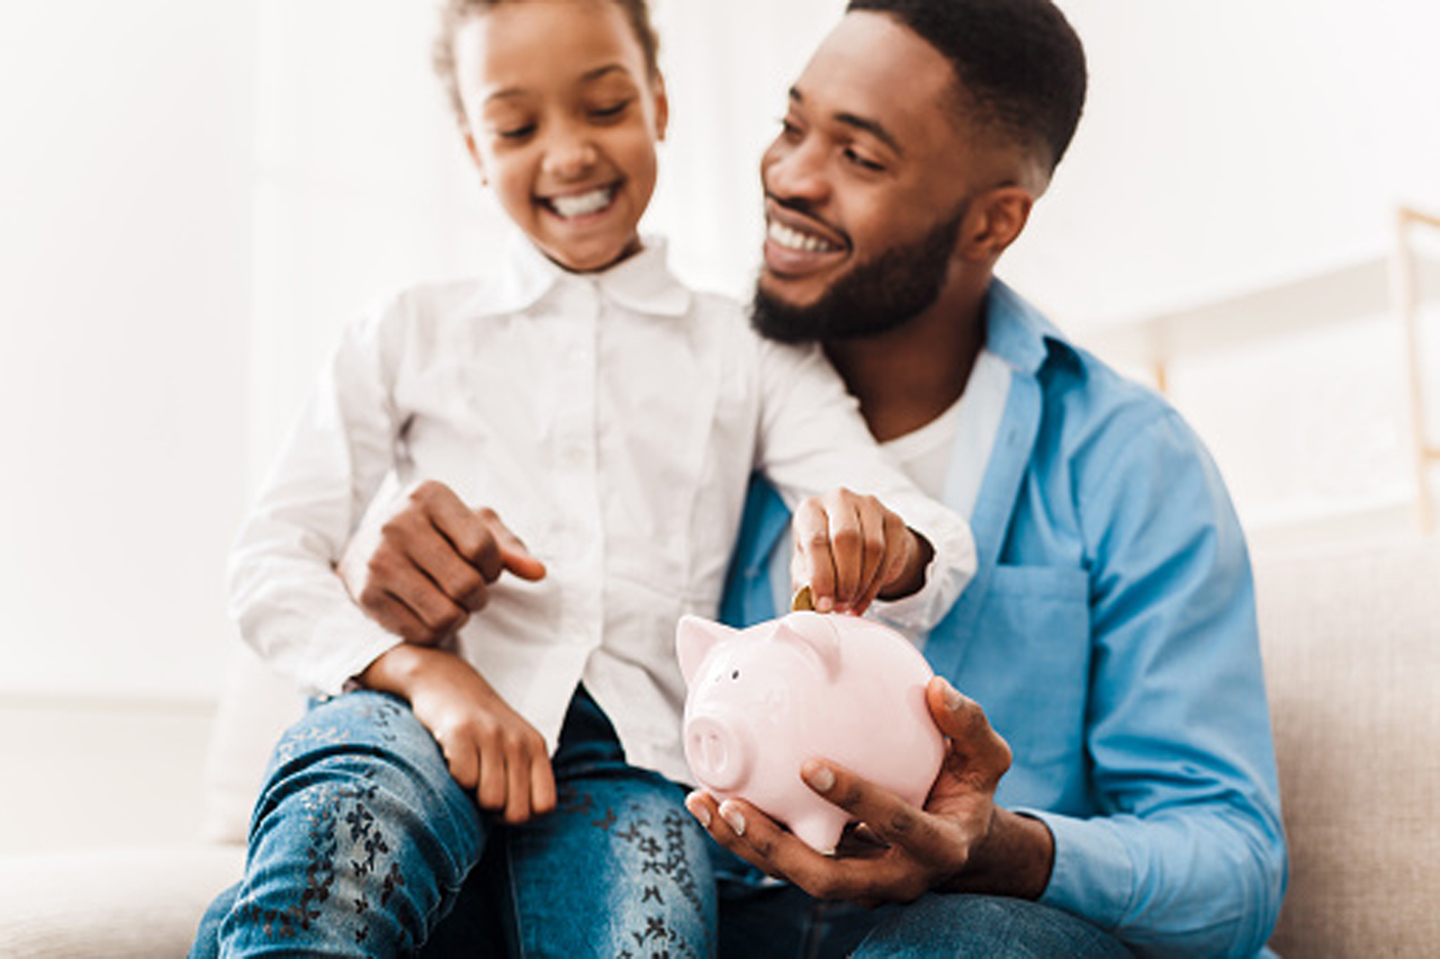 Man holding daughter while she puts money in a piggy bank